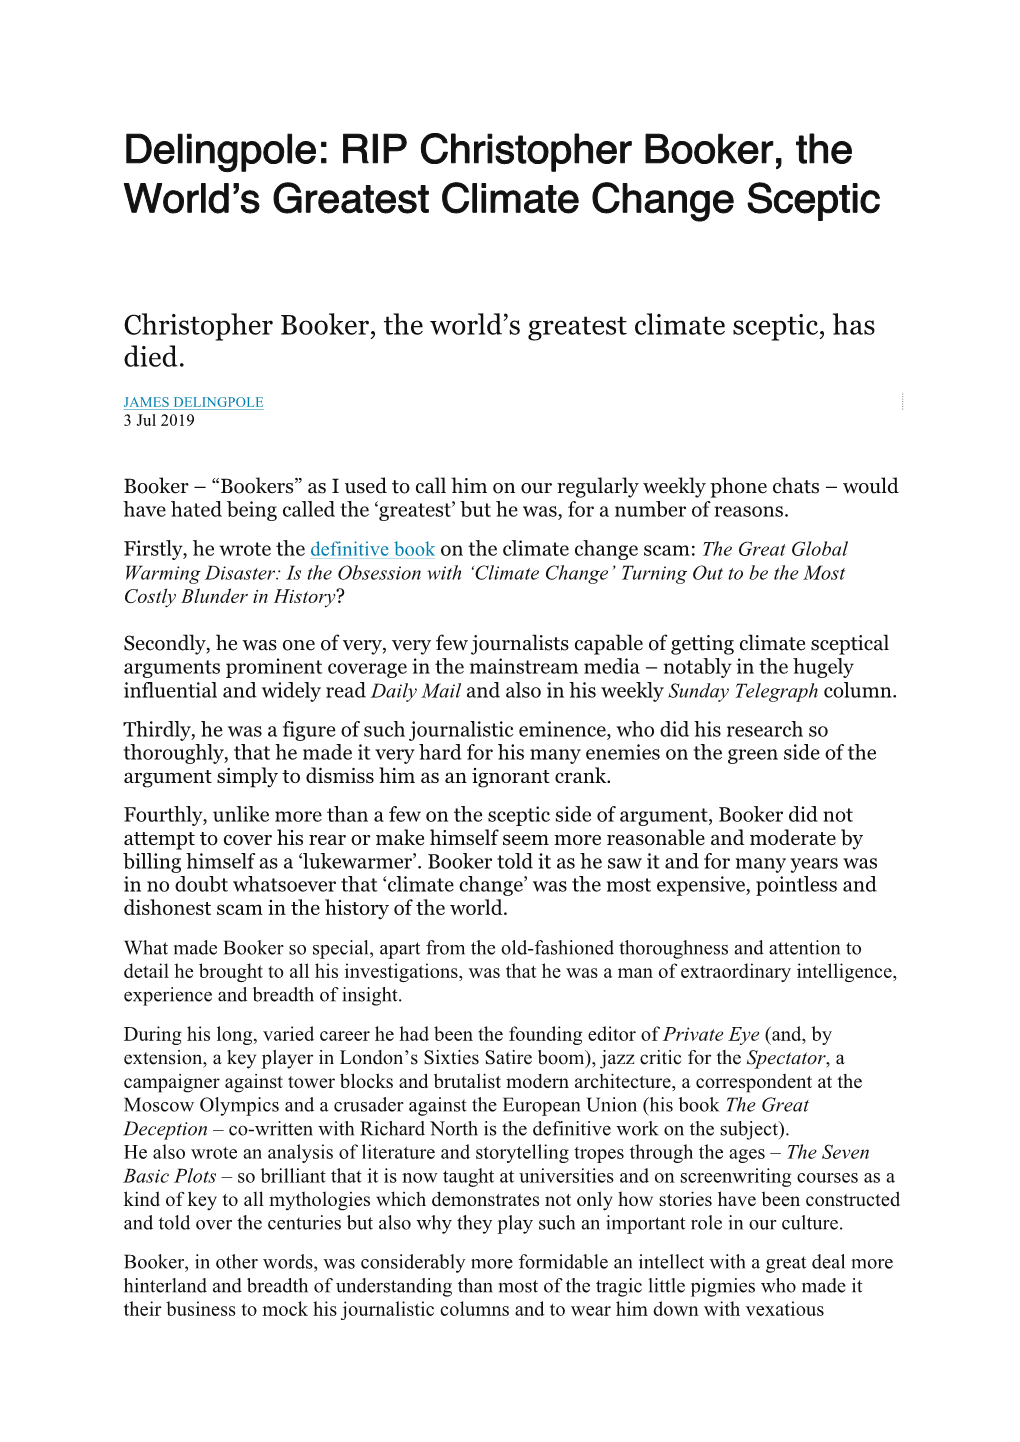 Delingpole: RIP Christopher Booker, the World's Greatest Climate Change Sceptic